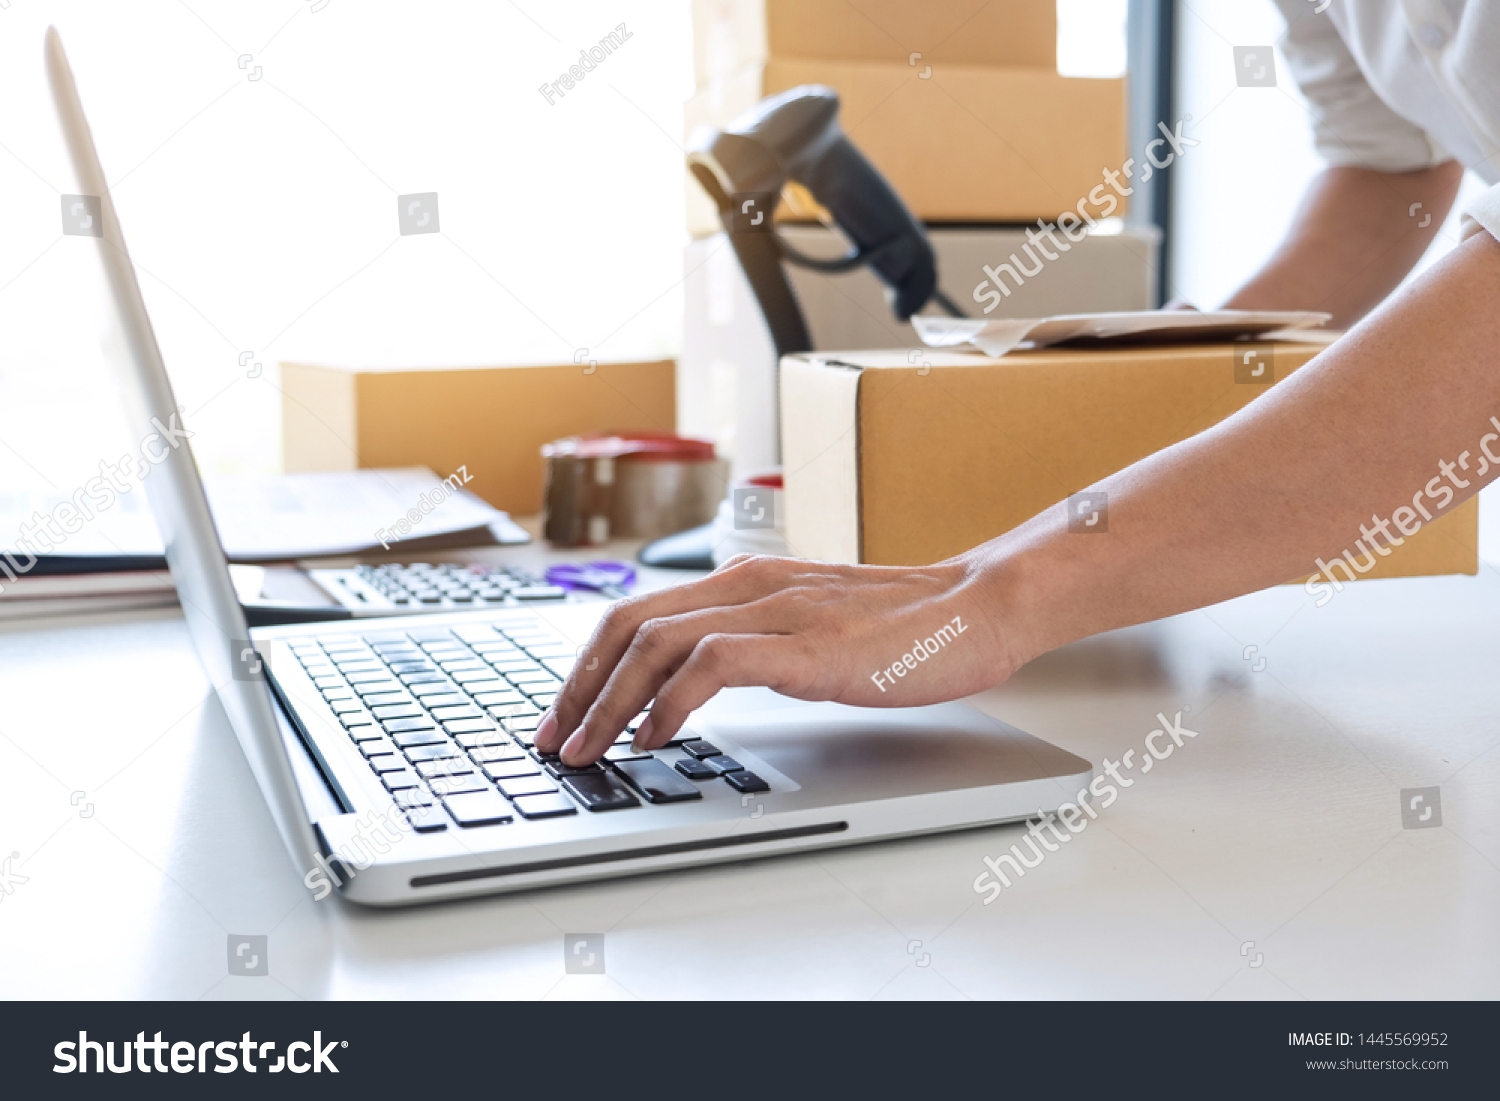 Shipment Online Sales, Small business or SME entrepreneur owner delivery service and working packing box, business owner working checking order to confirm before sending customer in post office. #1445569952